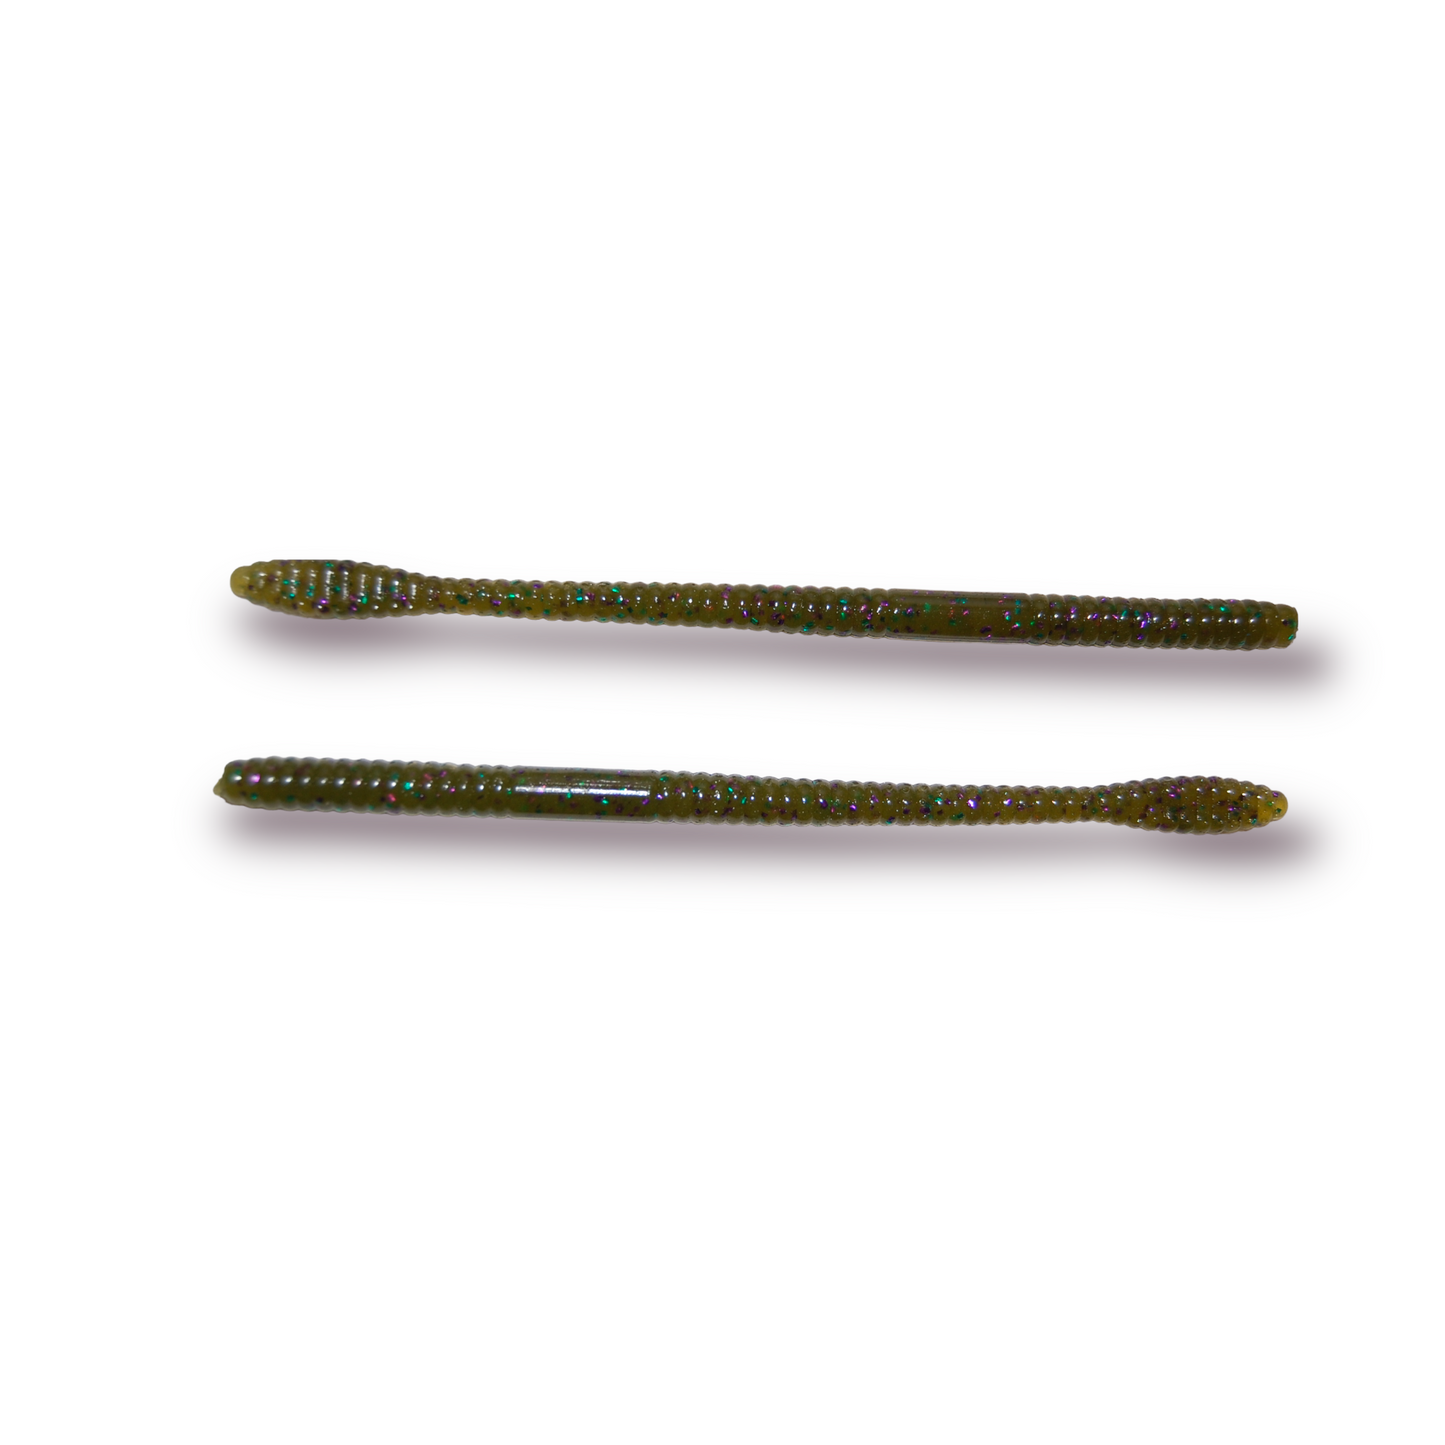 6.25" Spade Tail Worm (12/Pack)